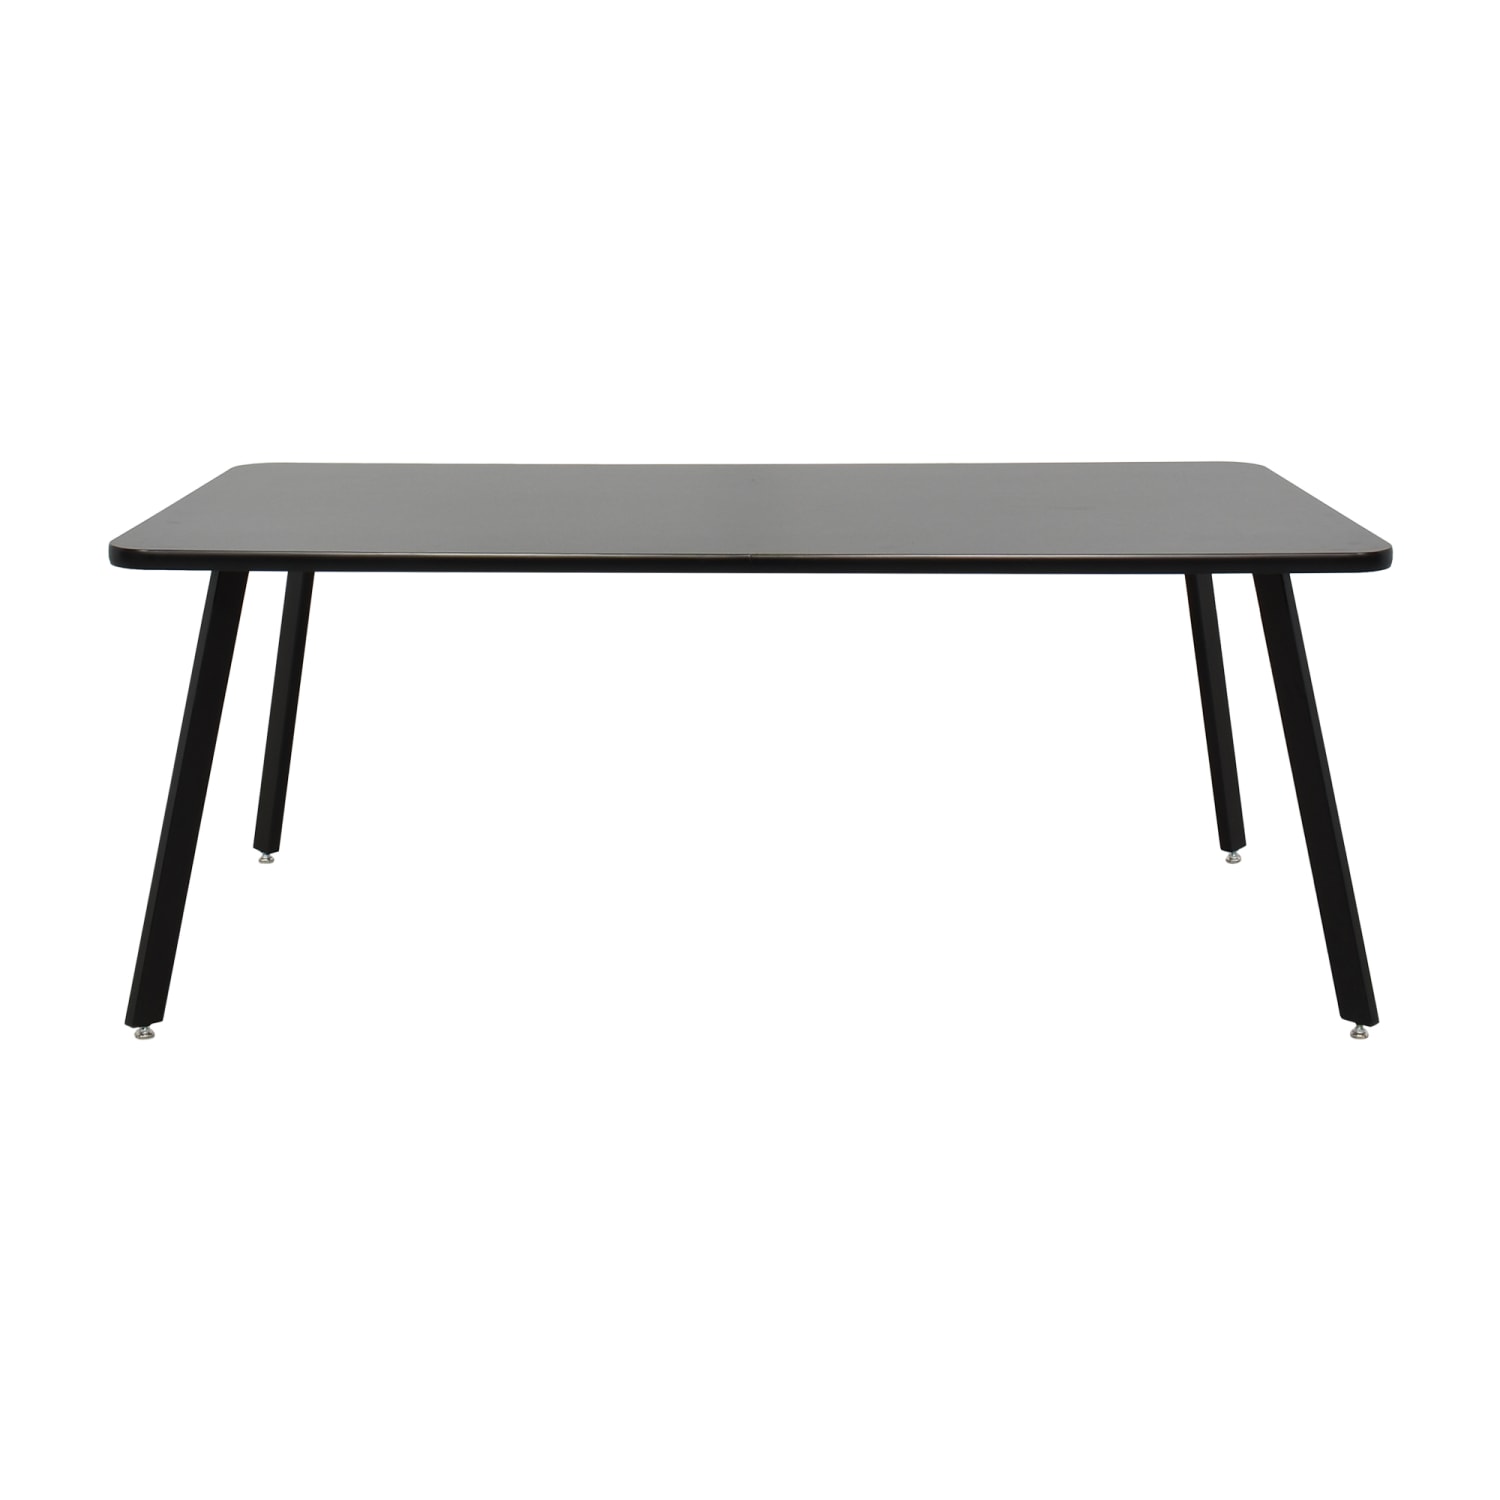 Knoll Rockwell Unscripted Easy Table | 30% Off | Kaiyo